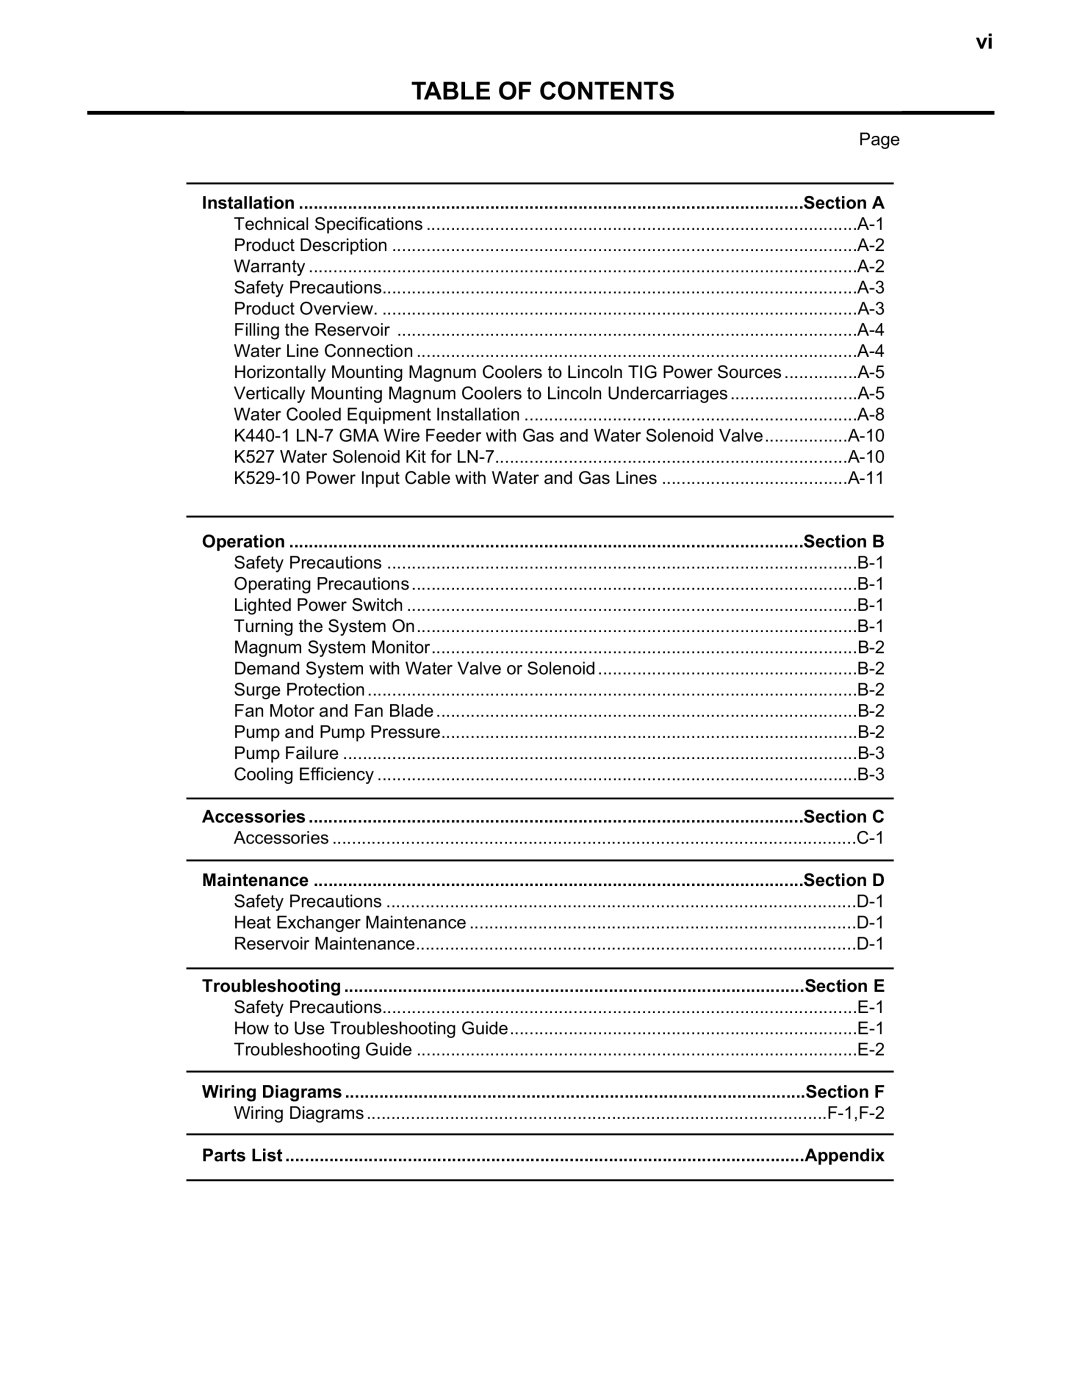 Lincoln Electric IM438-B Table Of Contents, Section A, Section B, Section C, Section D, Section E, Section F, Appendix 